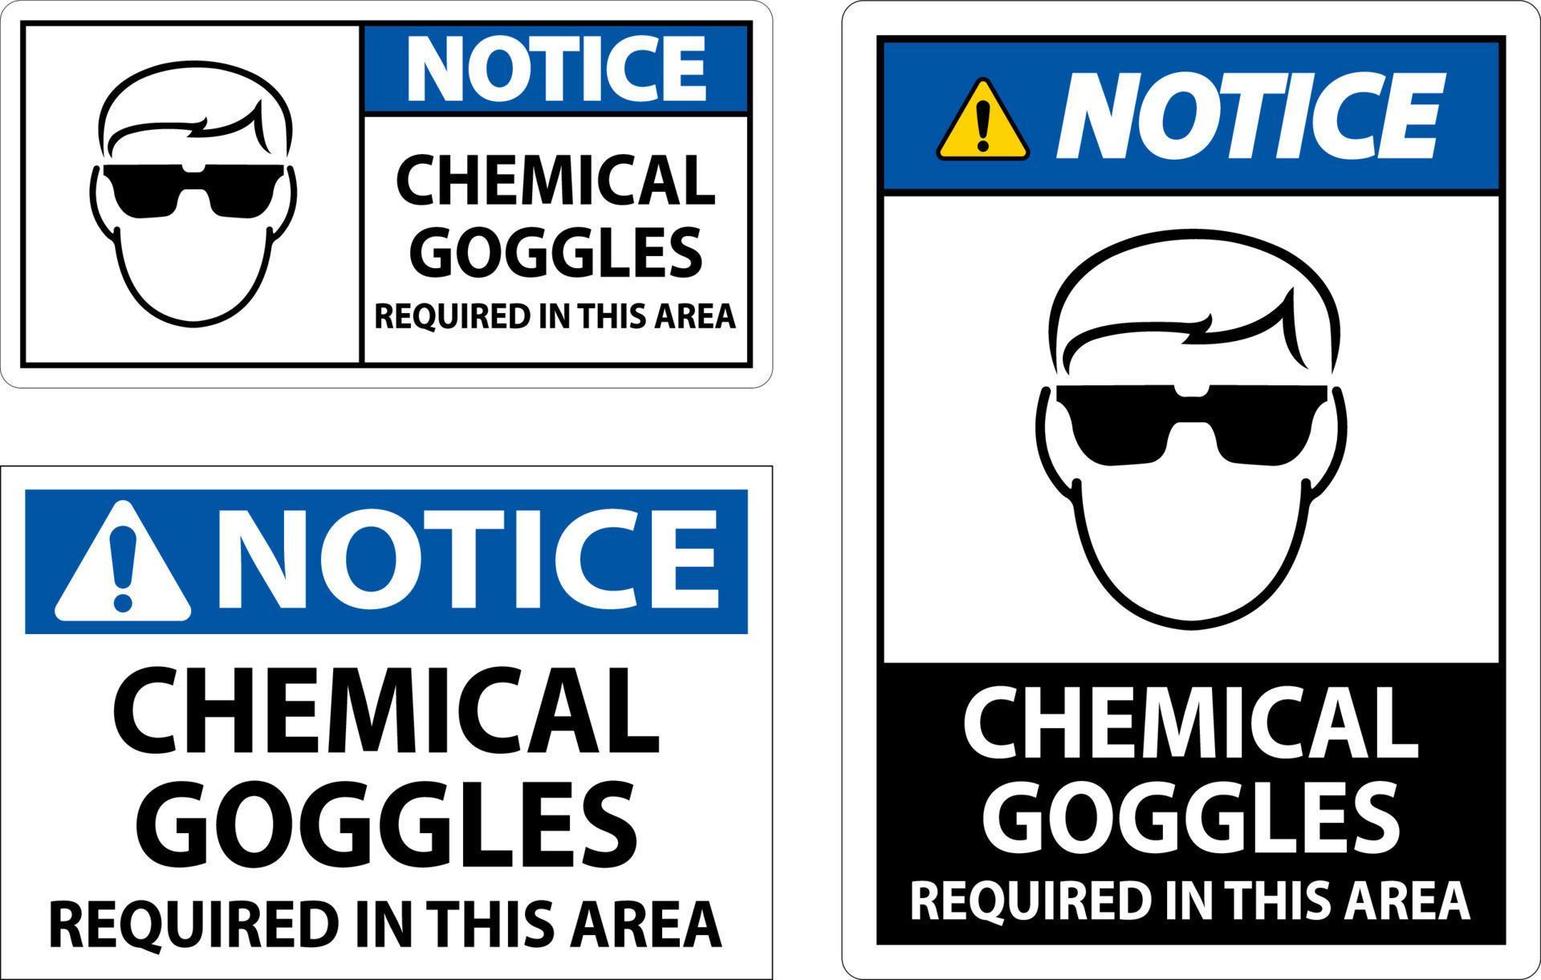 Notice Chemical Goggles Required Sign On White Background vector